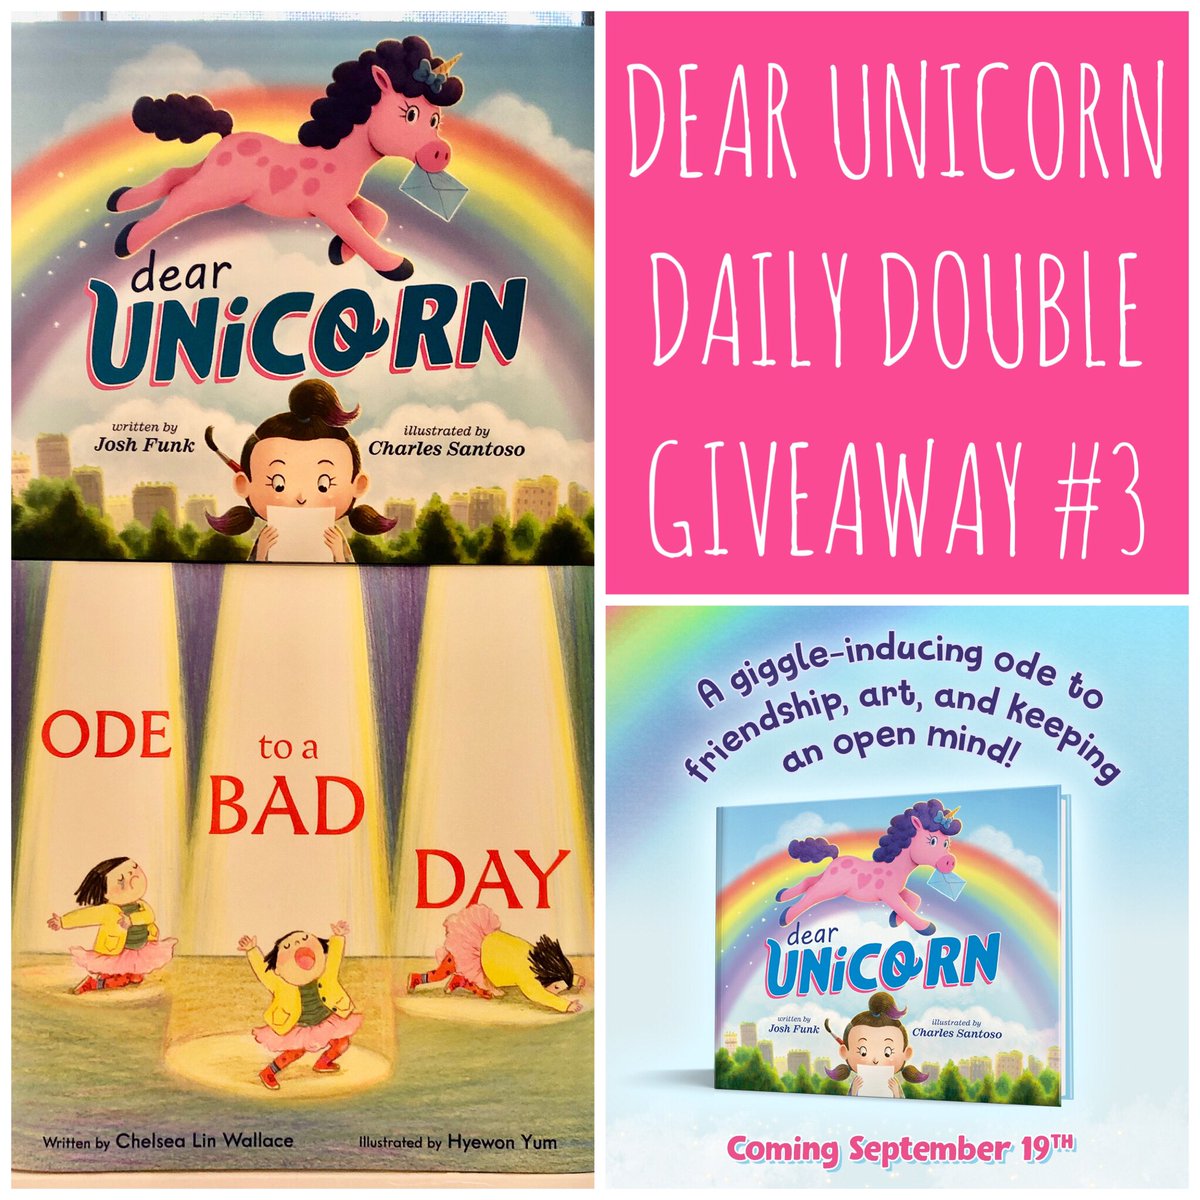 DEAR UNICORN Daily Double #Giveaway #3 To enter: ✅ FOLLOW ❤️ LIKE 🔃 REPOST/QUOTEPOST BONUS: 👉 COMMENT & TAG A FRIEND DOUBLE BONUS: 🤞ENTER AGAIN on all social media platforms TRIPLE BONUS: See previous giveaways and CHECK BACK DAILY for a new giveaway each day until 9/19…